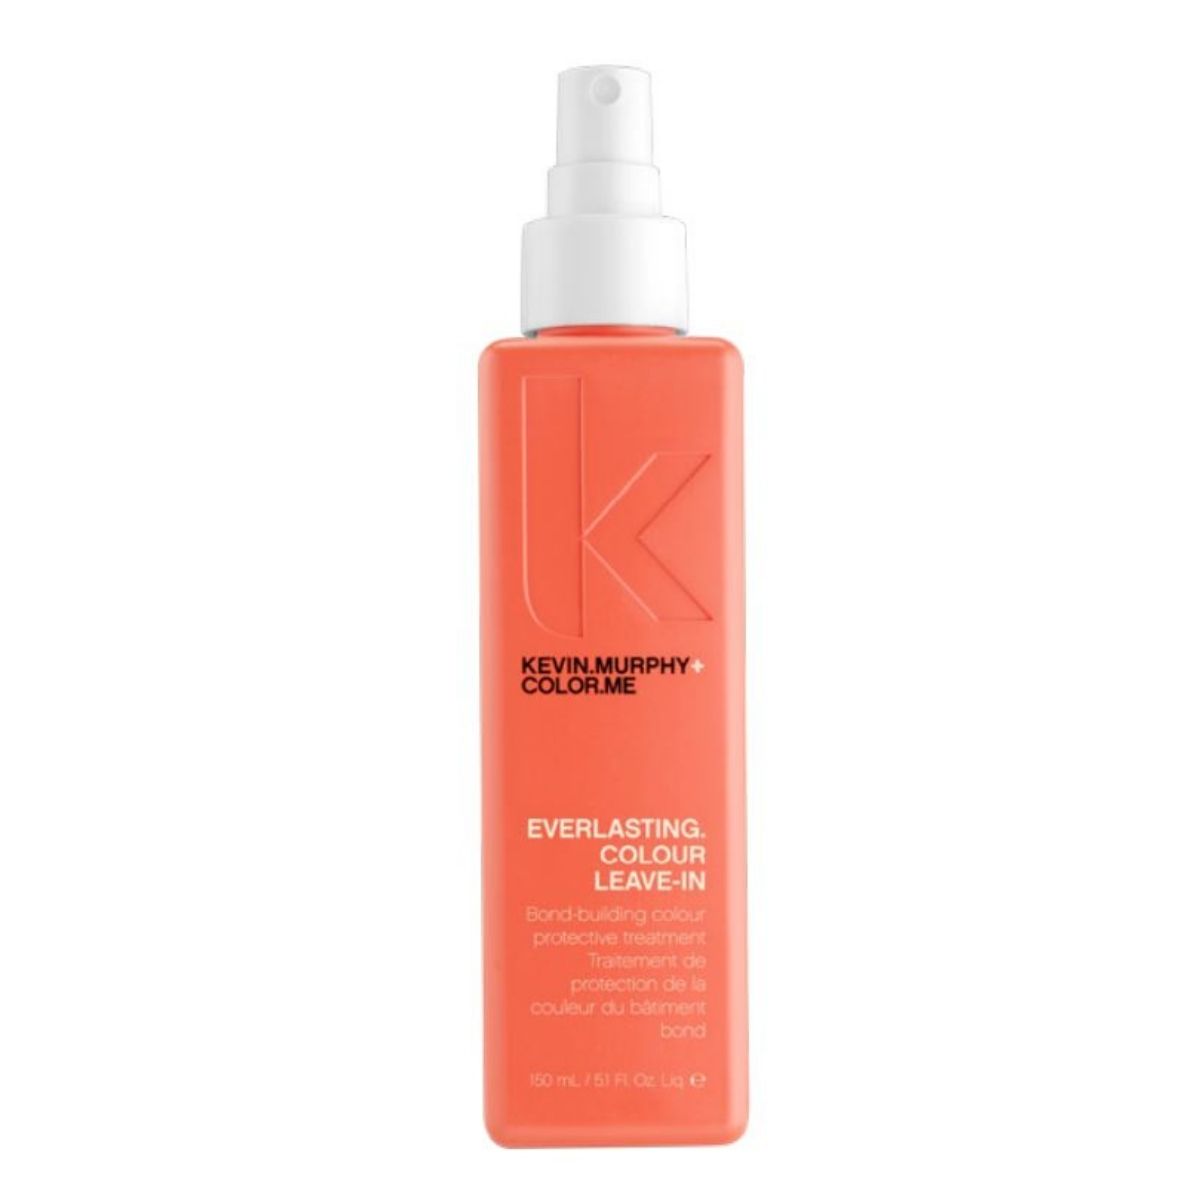 Kevin Murphy Everlasting.Colour Leave-In Treatment